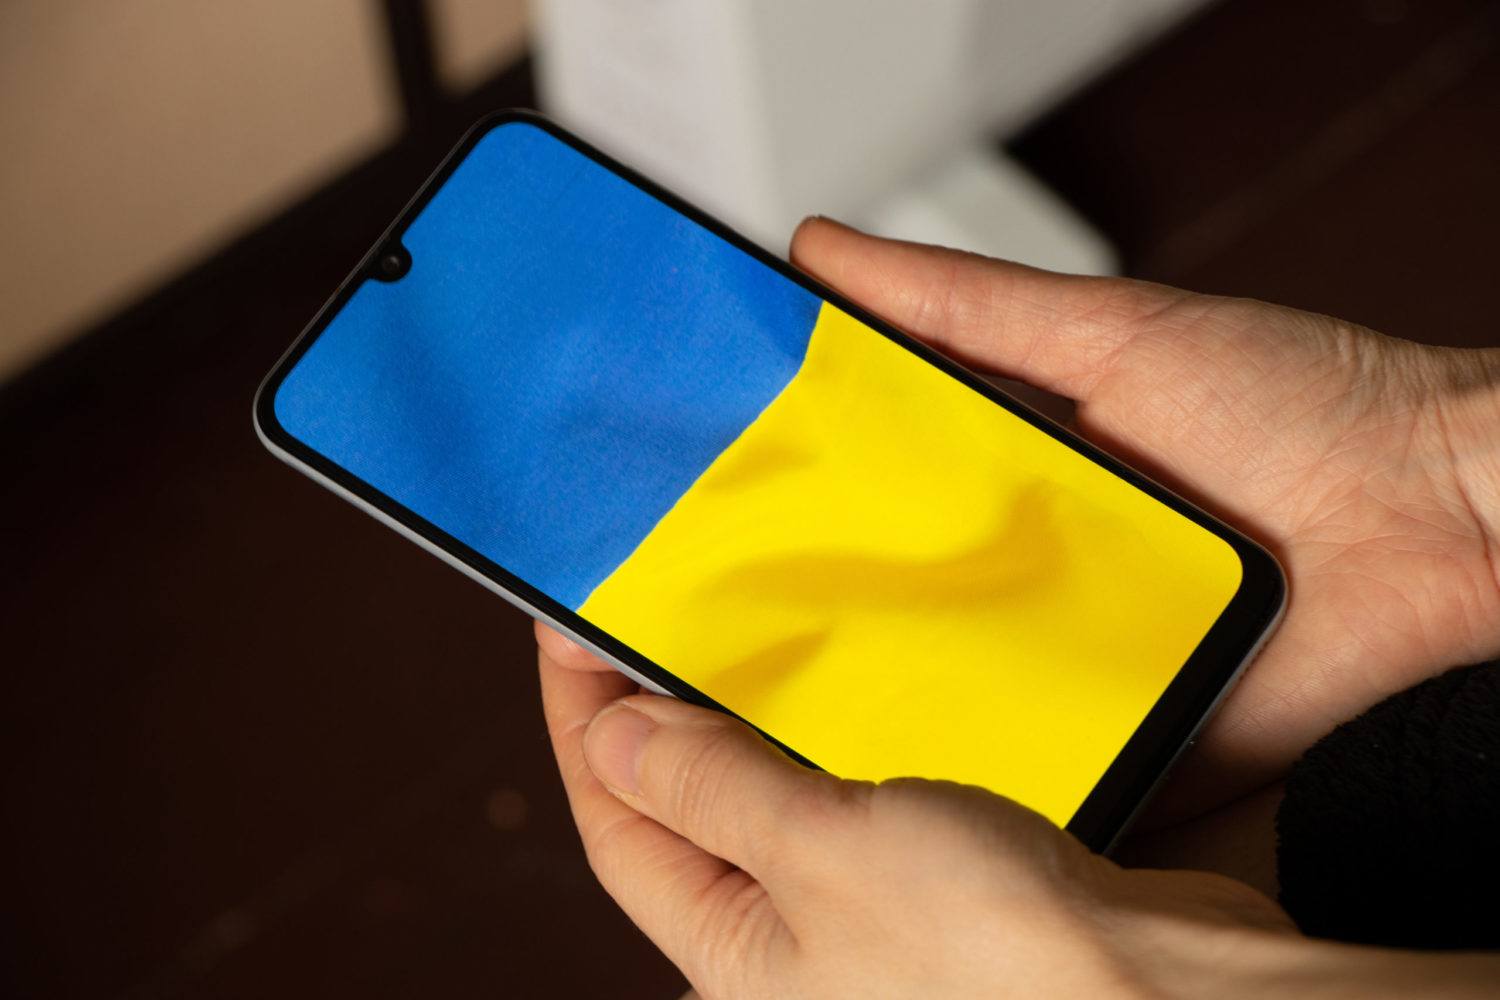 EU mobile operators must do more to ease voice communication between Ukraine and Europe